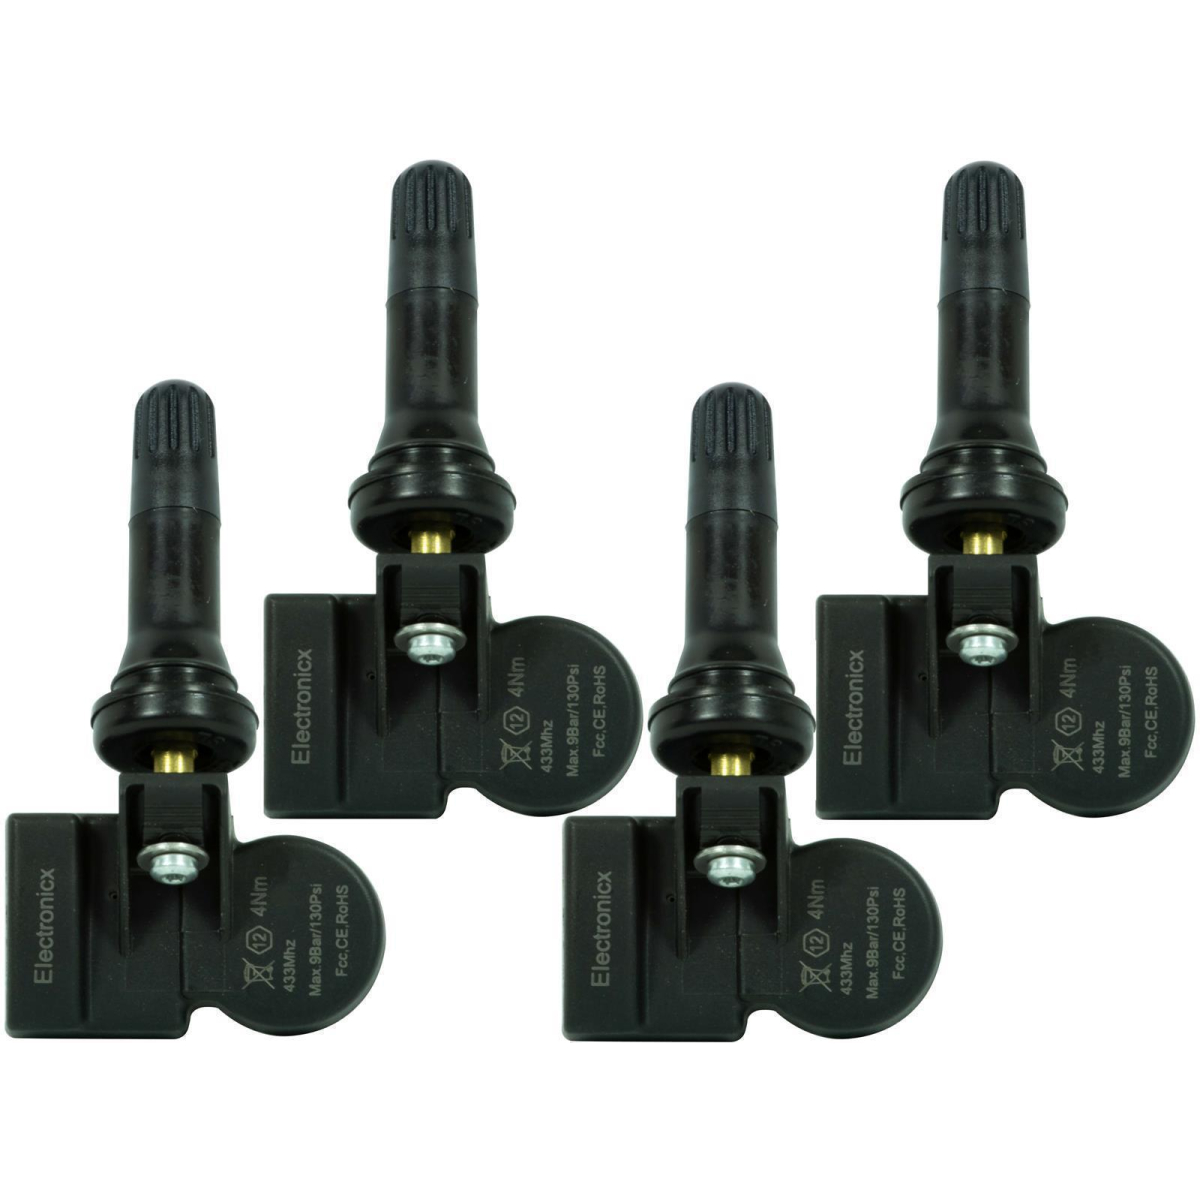 4 tire pressure sensors rdks sensors rubber valve for Lexus RC Series XC1 Without Pressure Display 01.2014-12.2021